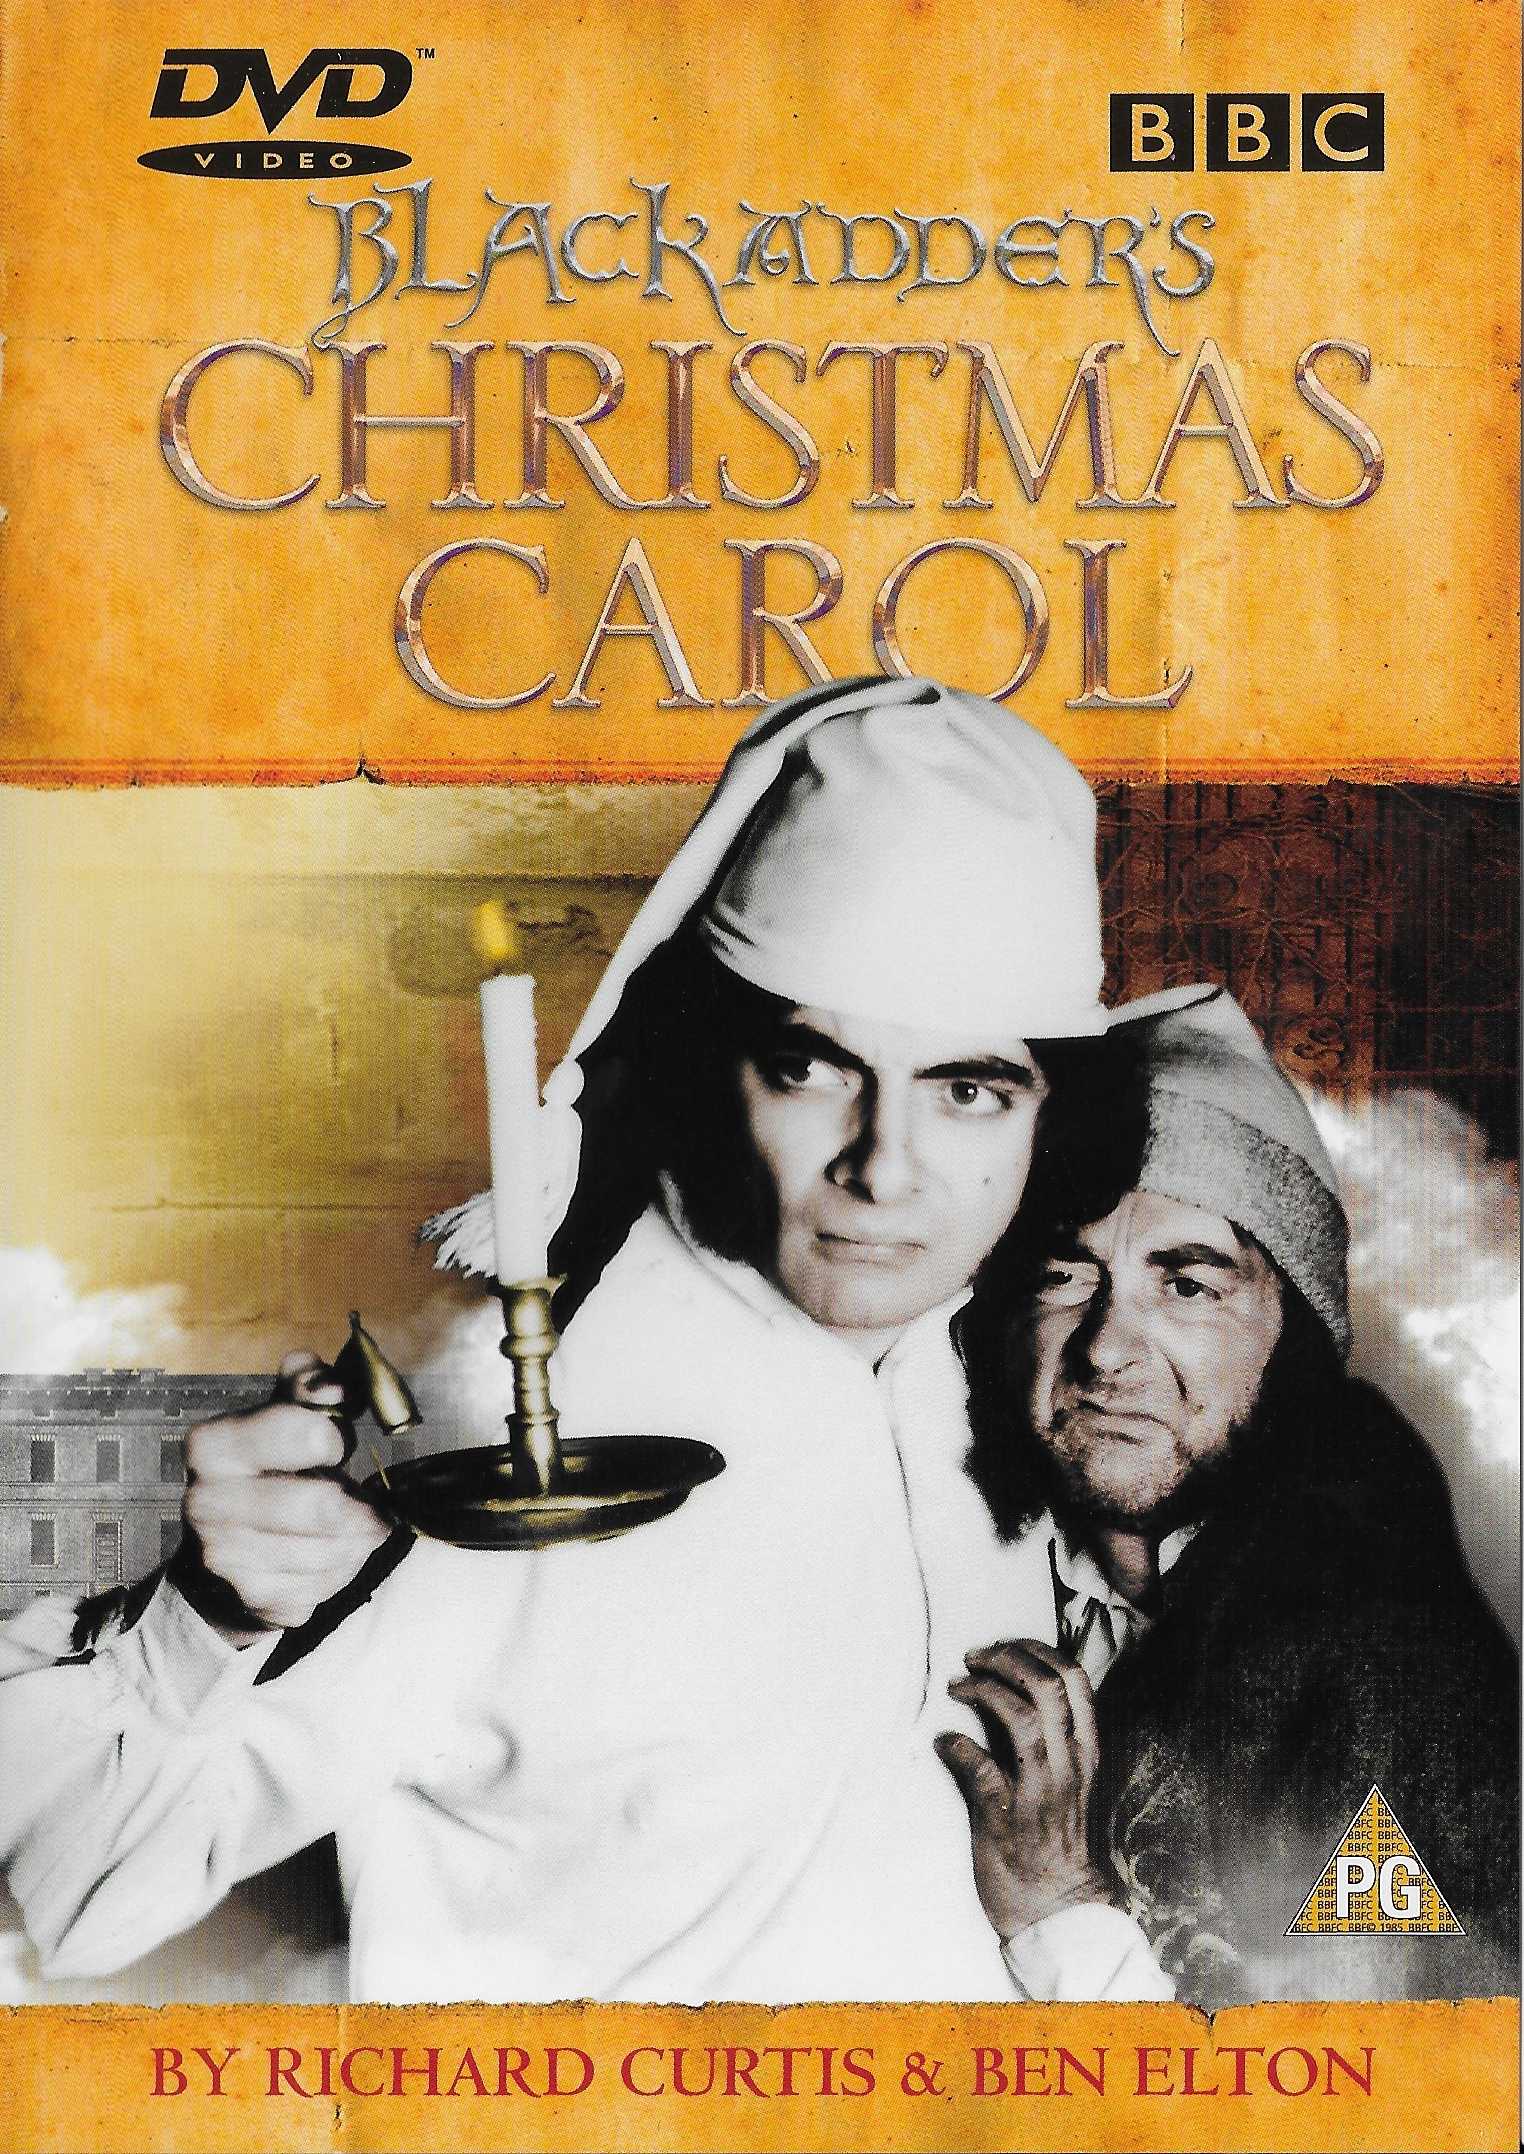 Picture of BBCDVD 1141 Black Adder's Christmas carol by artist Richard Curtis / Ben Elton from the BBC dvds - Records and Tapes library